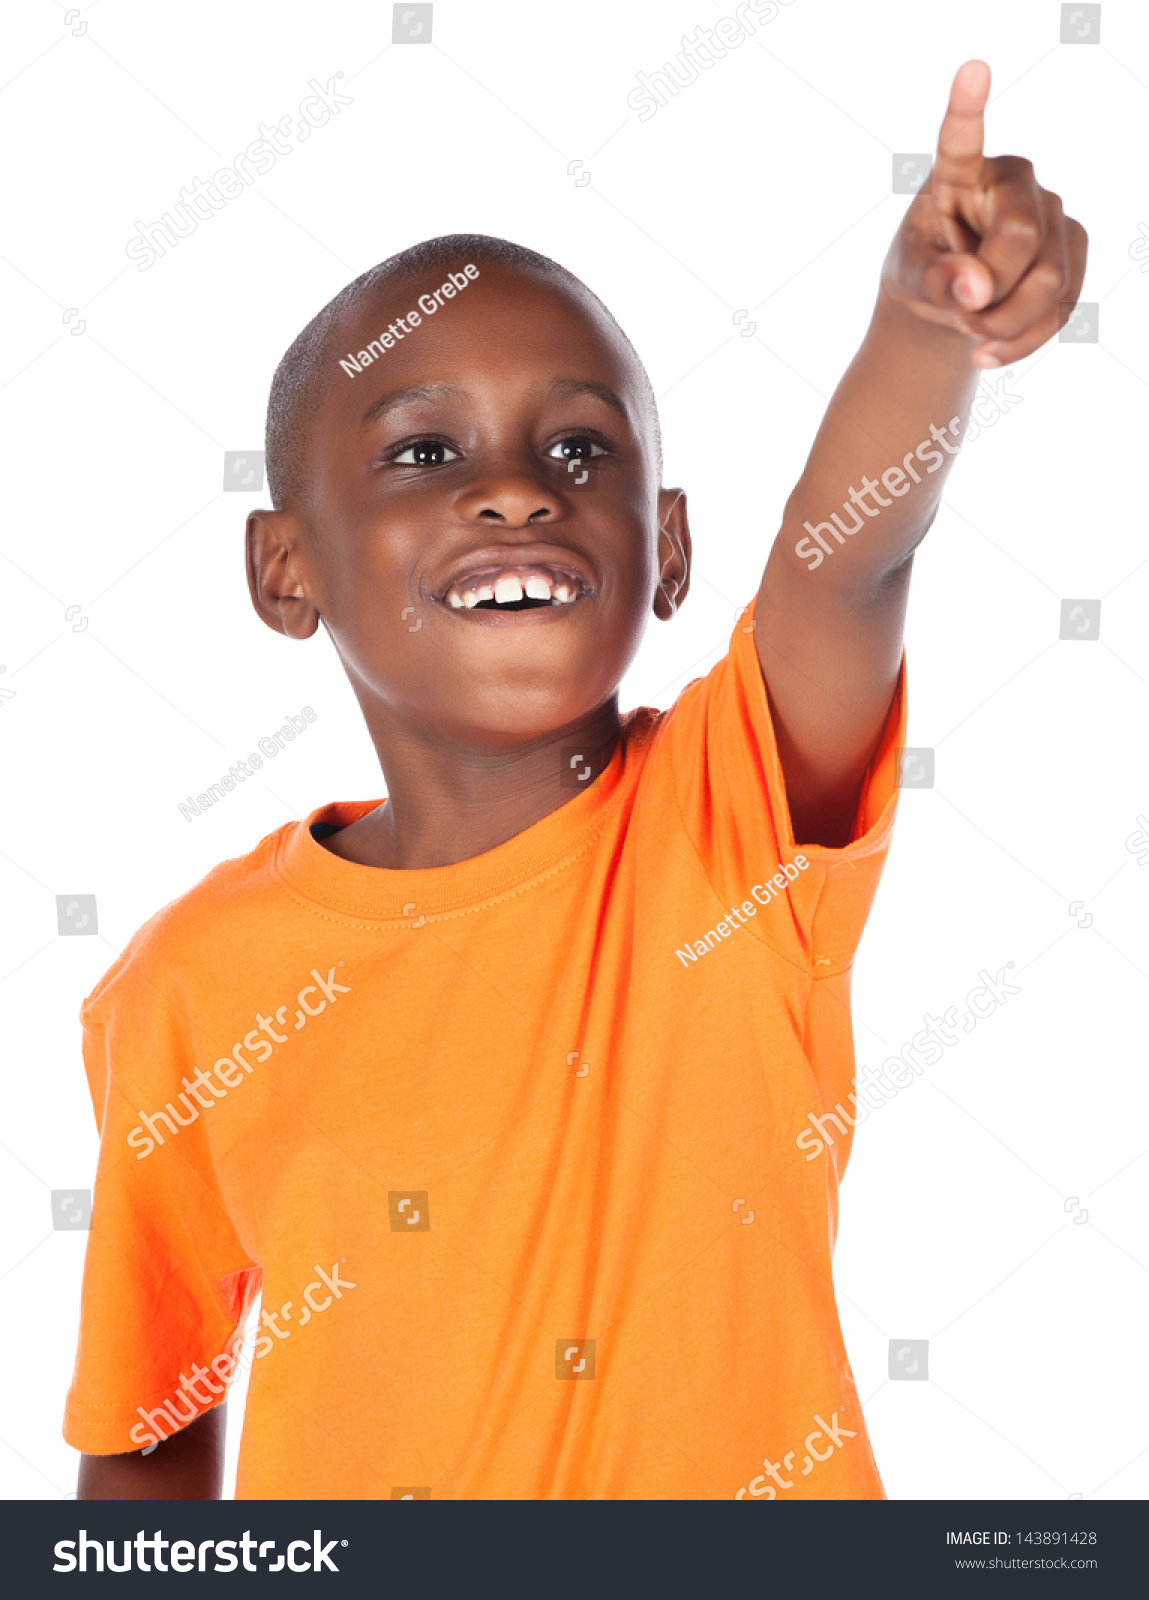 Cute African Boy Wearing A Bright Orange T-Shirt. The Boy Is Pointing ...